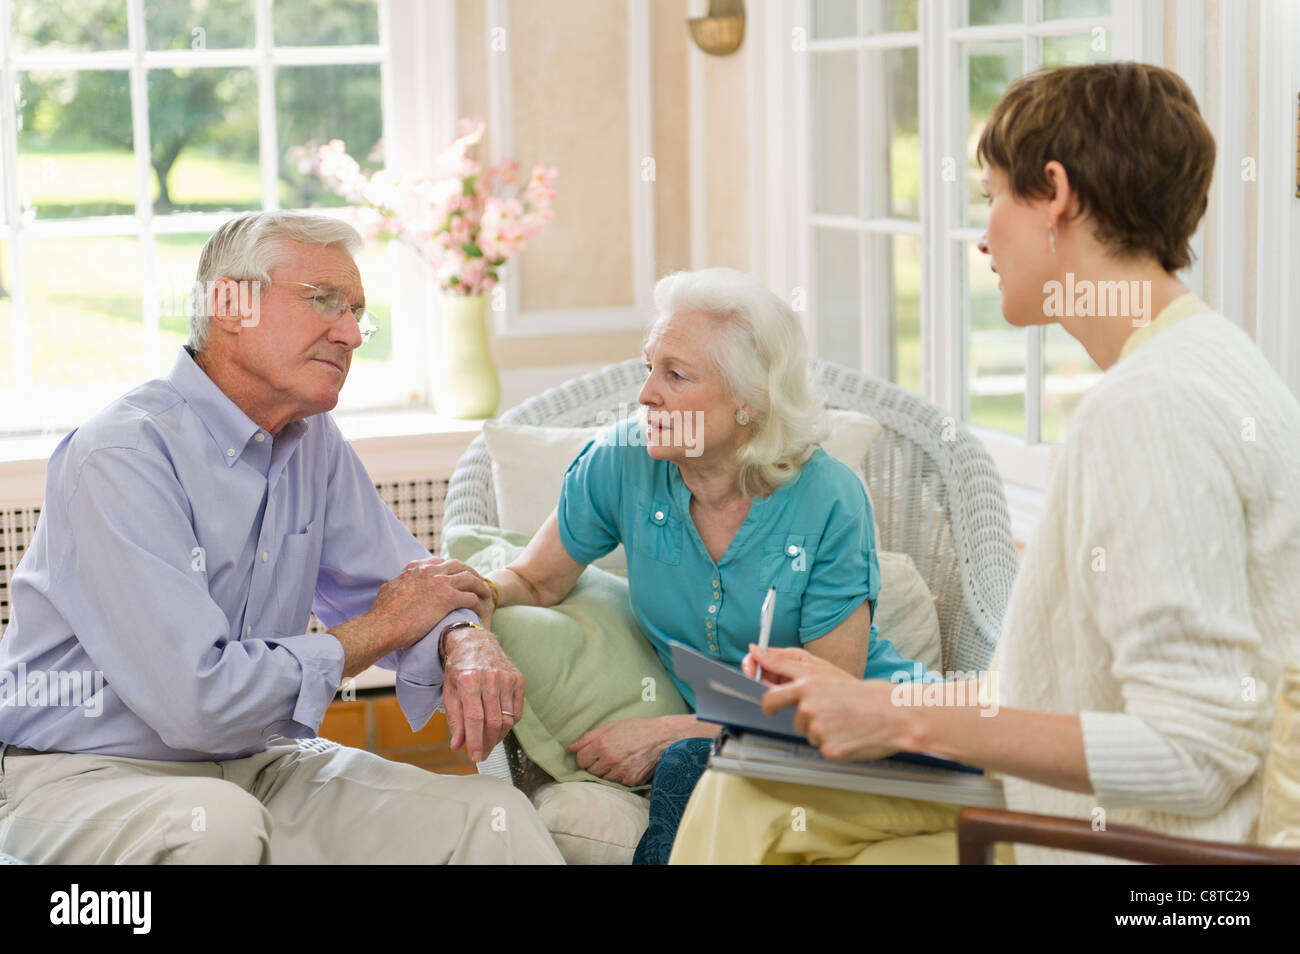 USA, New York State, Old Westbury, Nursing assistant talking with seniors in nursing home Stock Photo